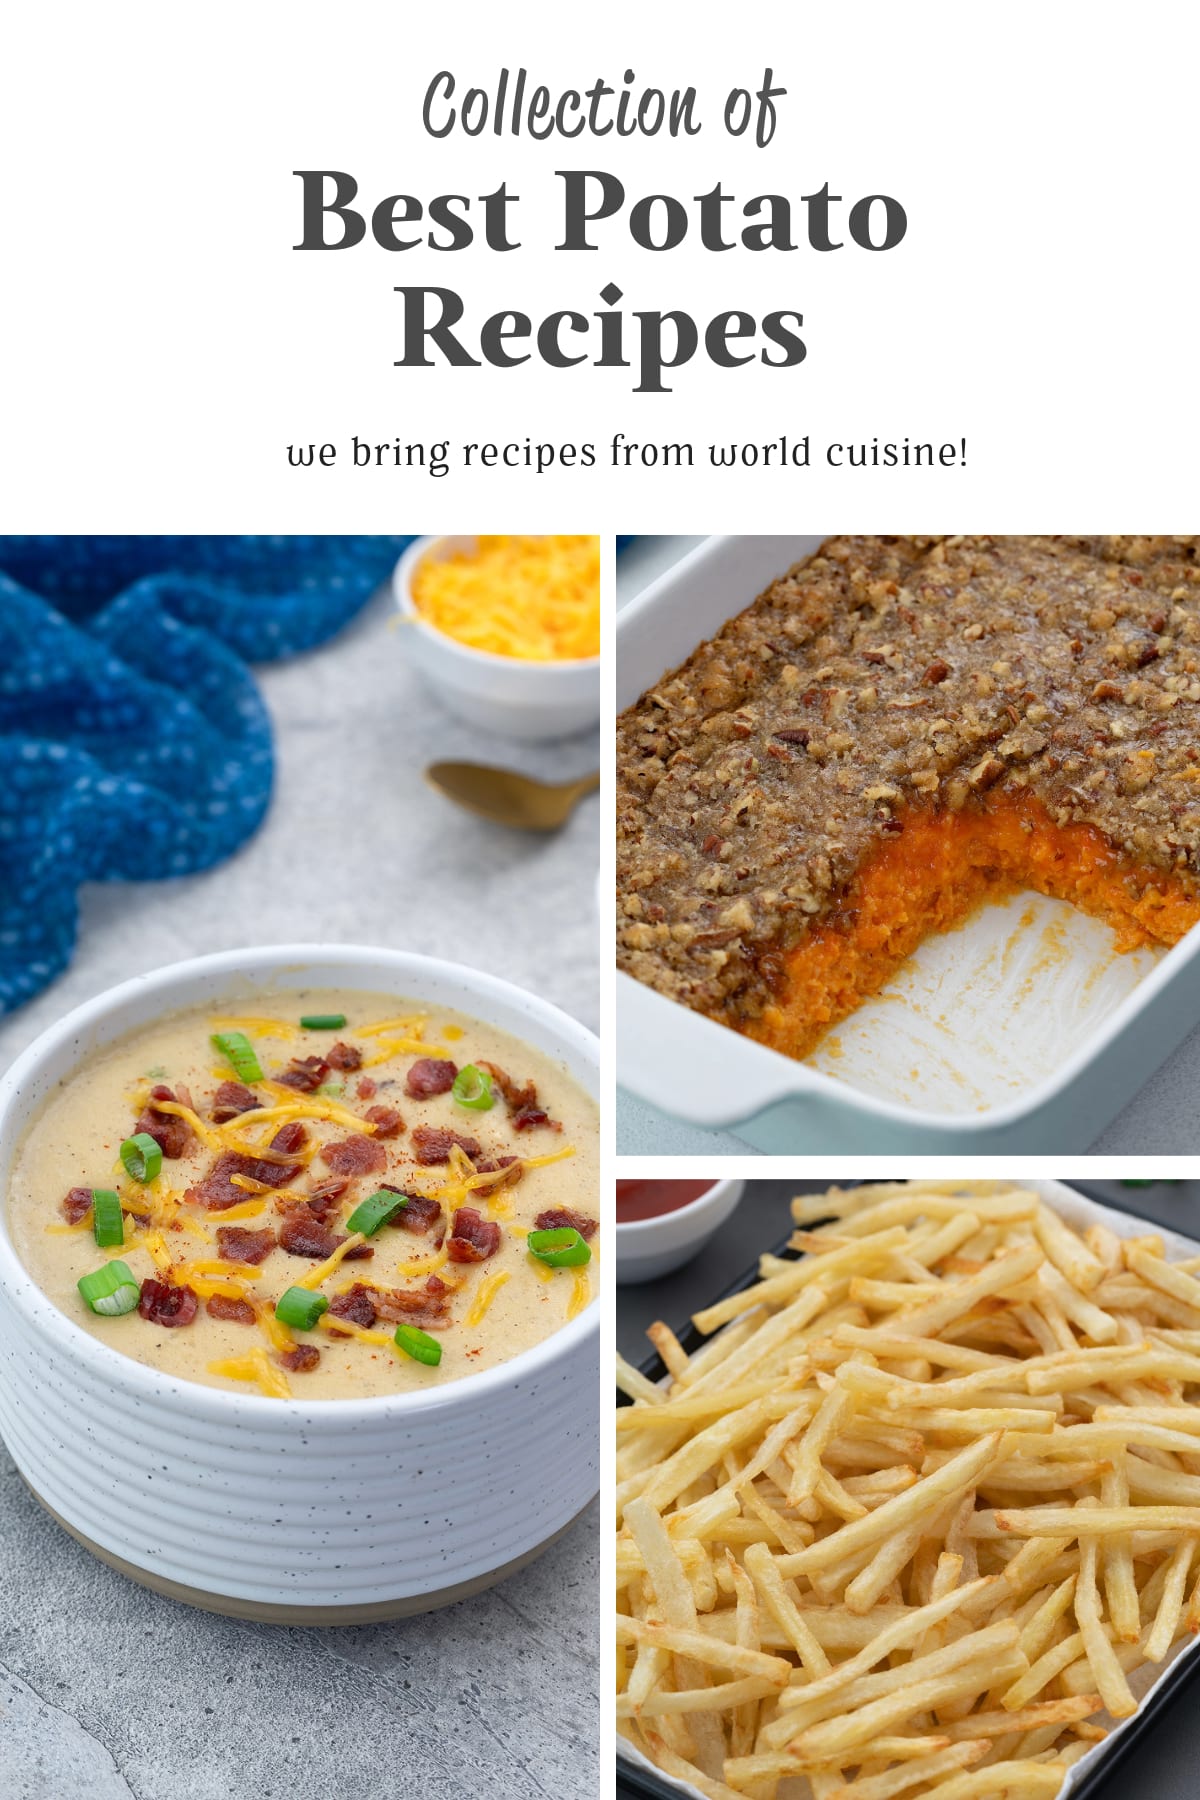 Three-image collage featuring a variety of potato dishes: a creamy potato soup in a bowl, crispy French fries in a serving basket, and a golden potato casserole in a baking dish.